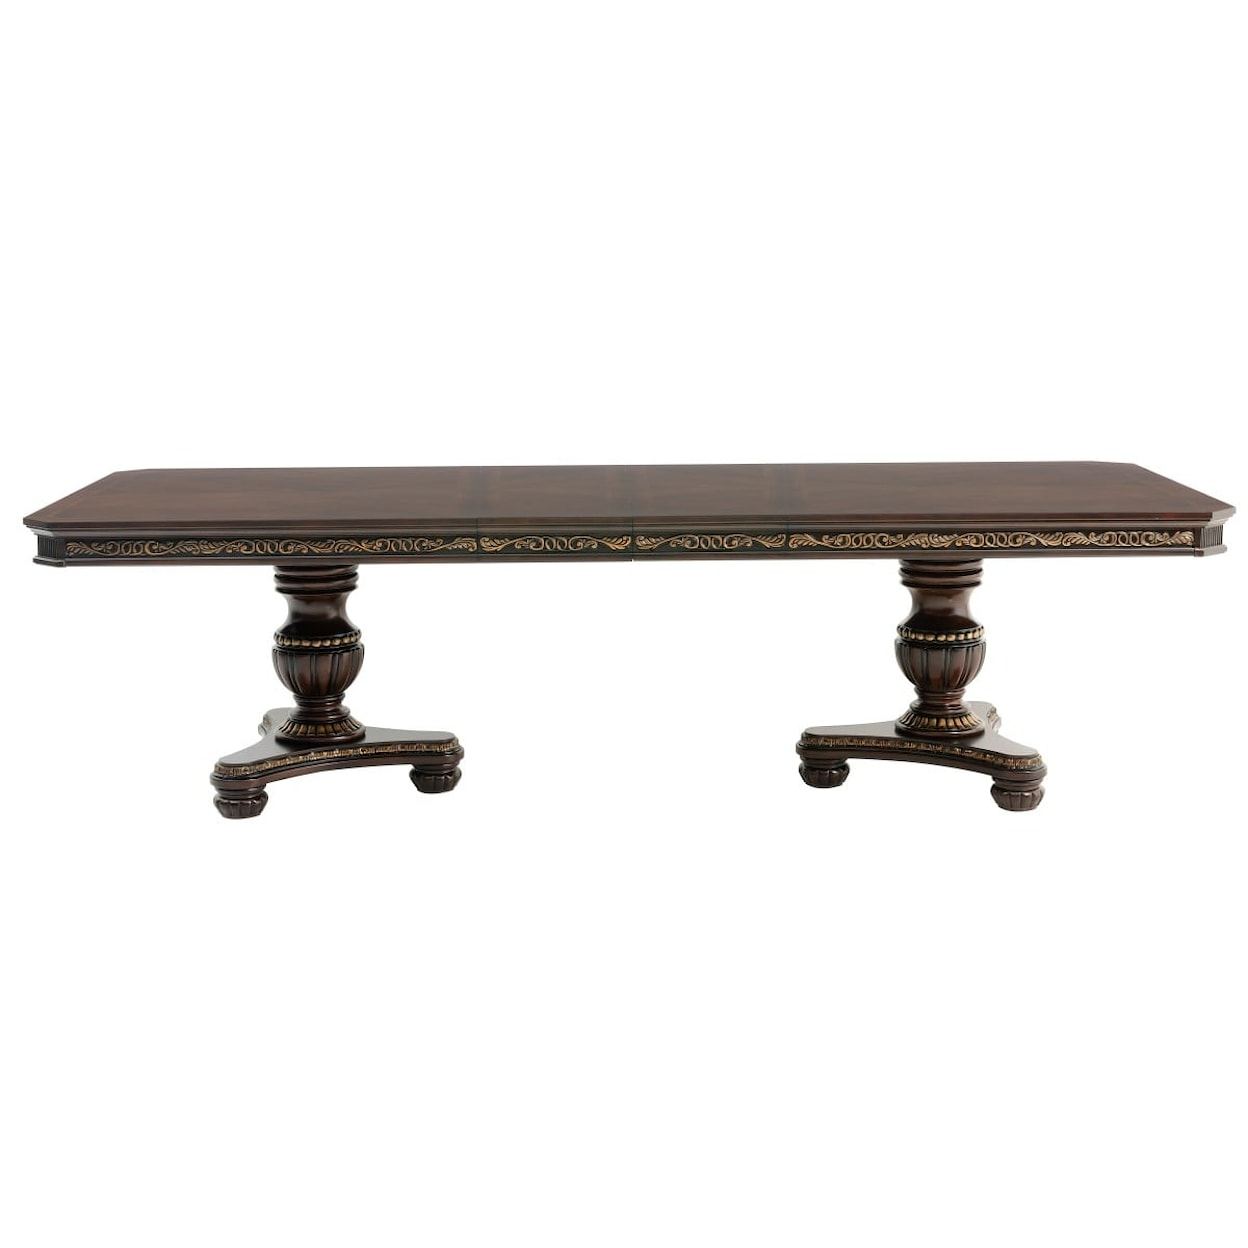 Homelegance Furniture Russian Hill Dining Table